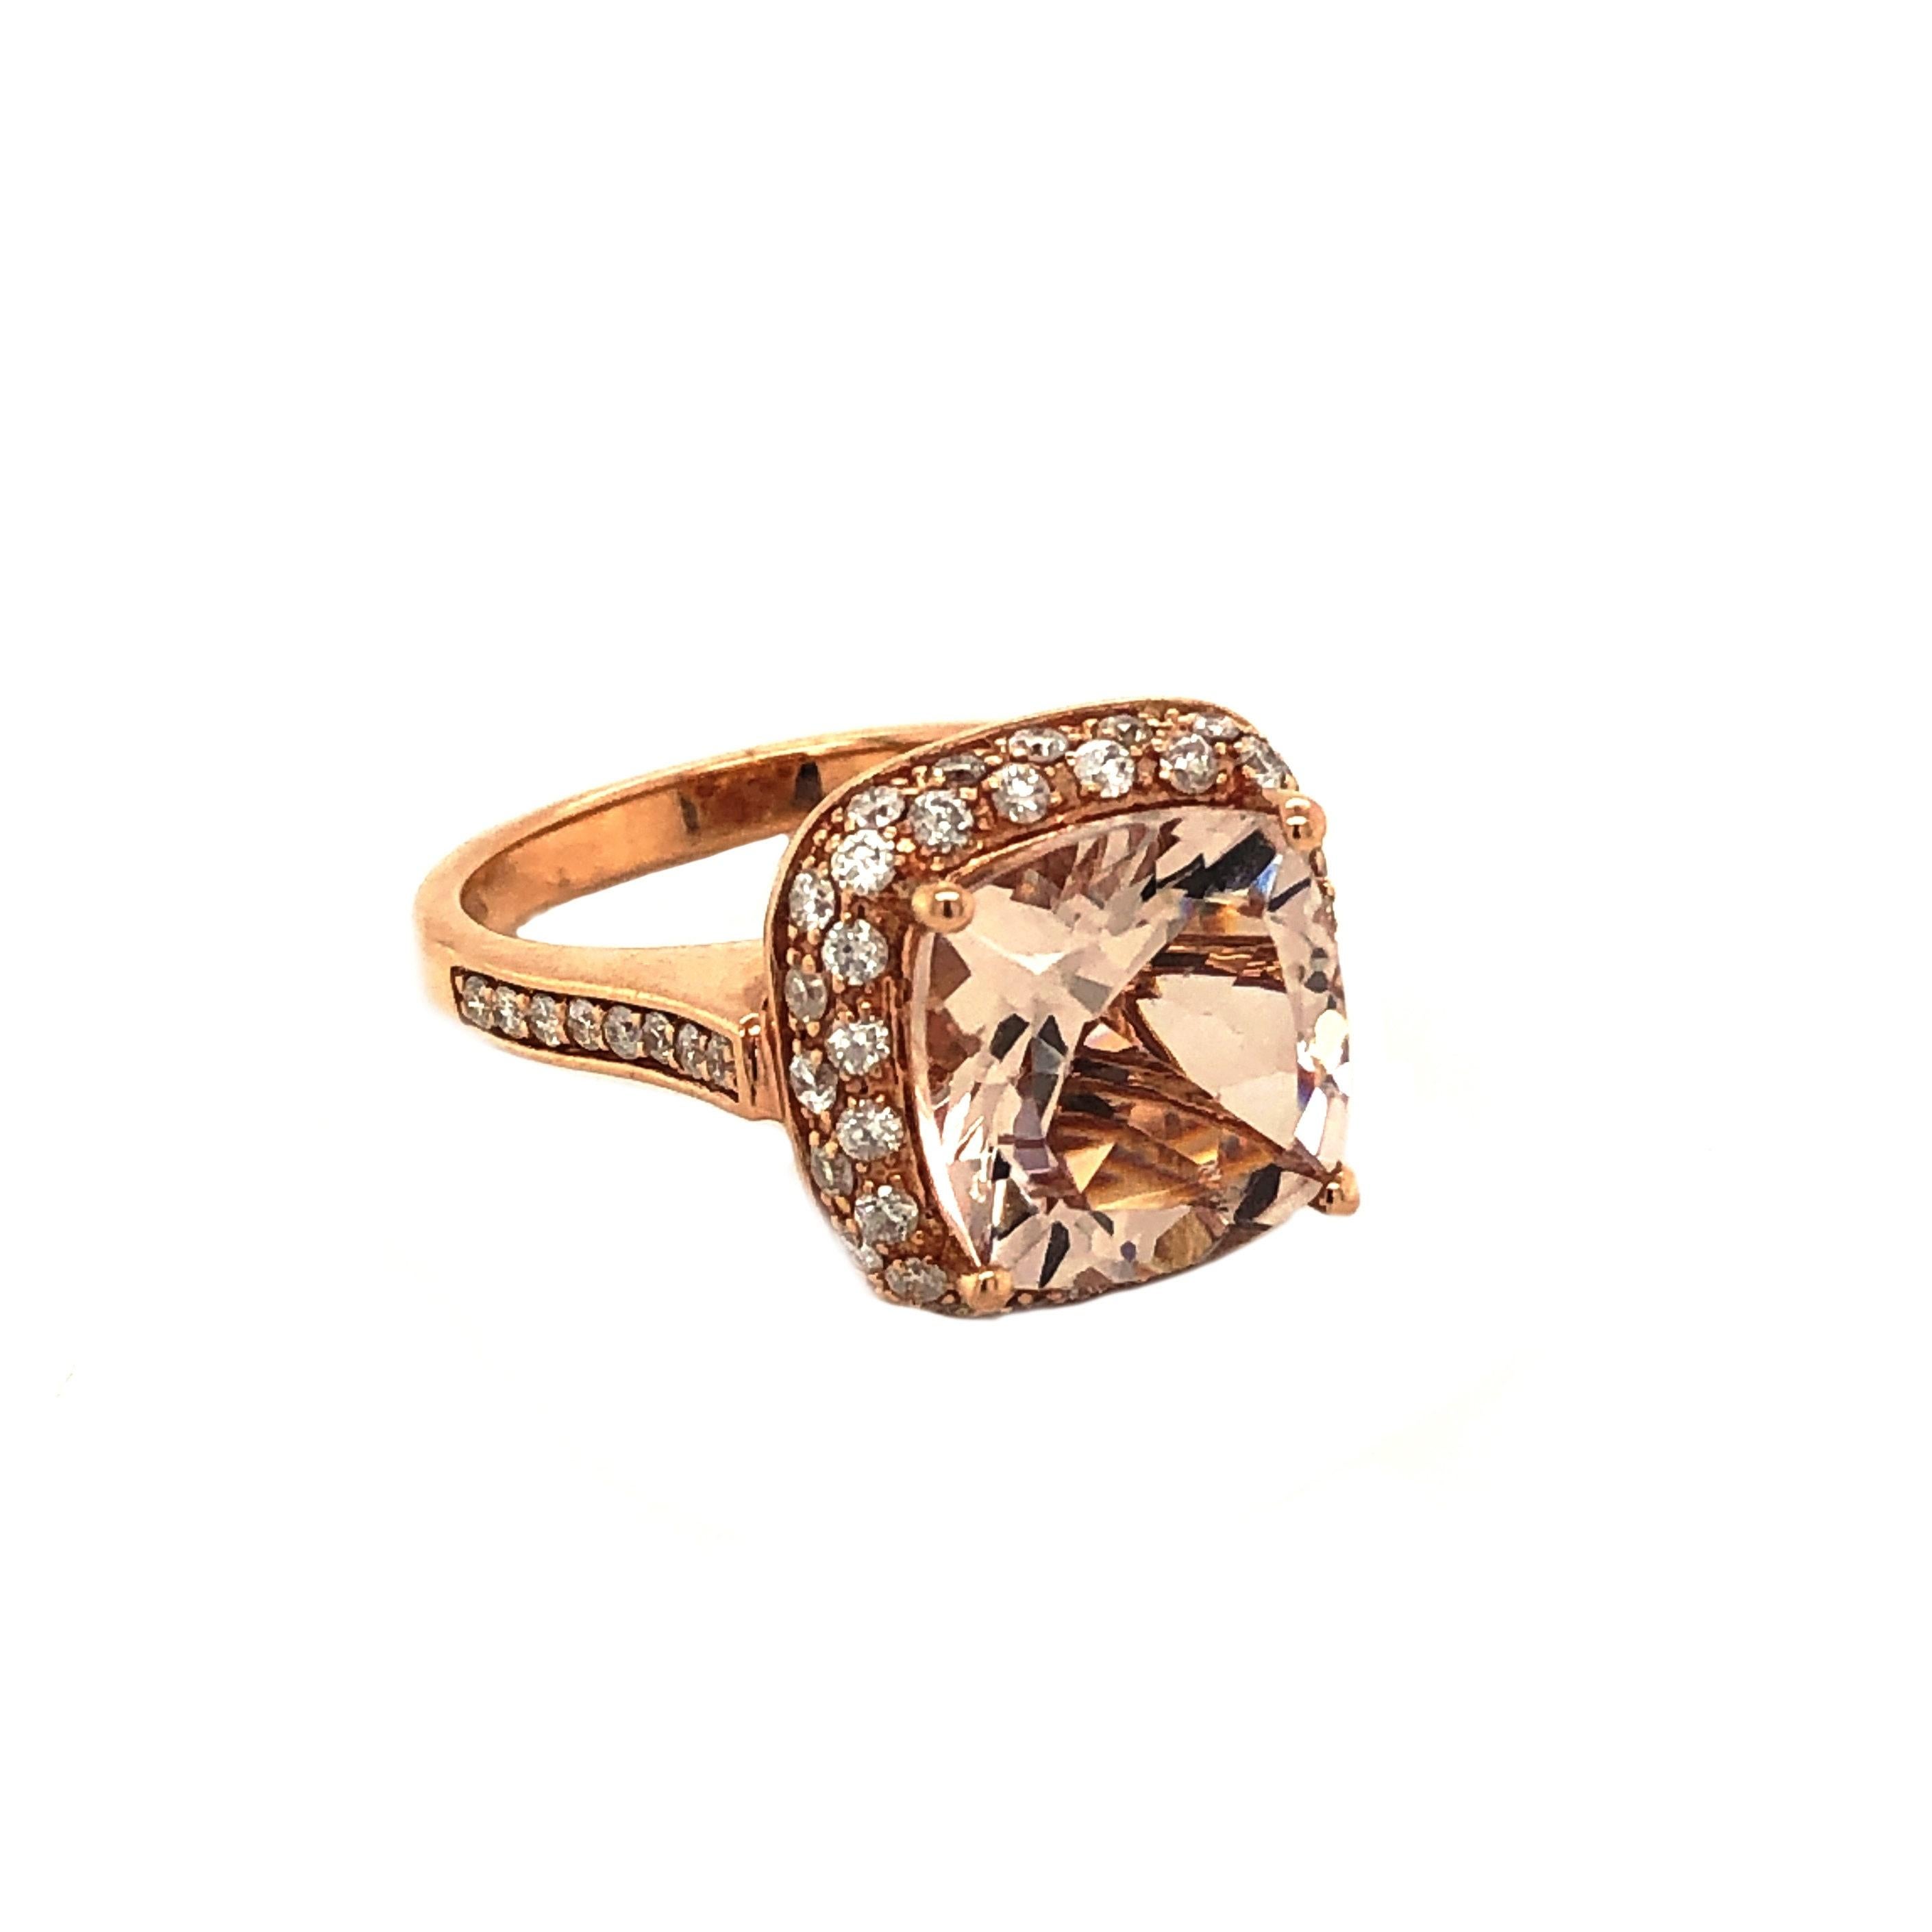 This is a gorgeous natural morganite and diamond ring set in solid 14K rose gold. The natural 11MM cushion cut morganite has an excellent peachy pink color and is surrounded by a halo of round cut white diamonds. The ring is stamped 14K and is a